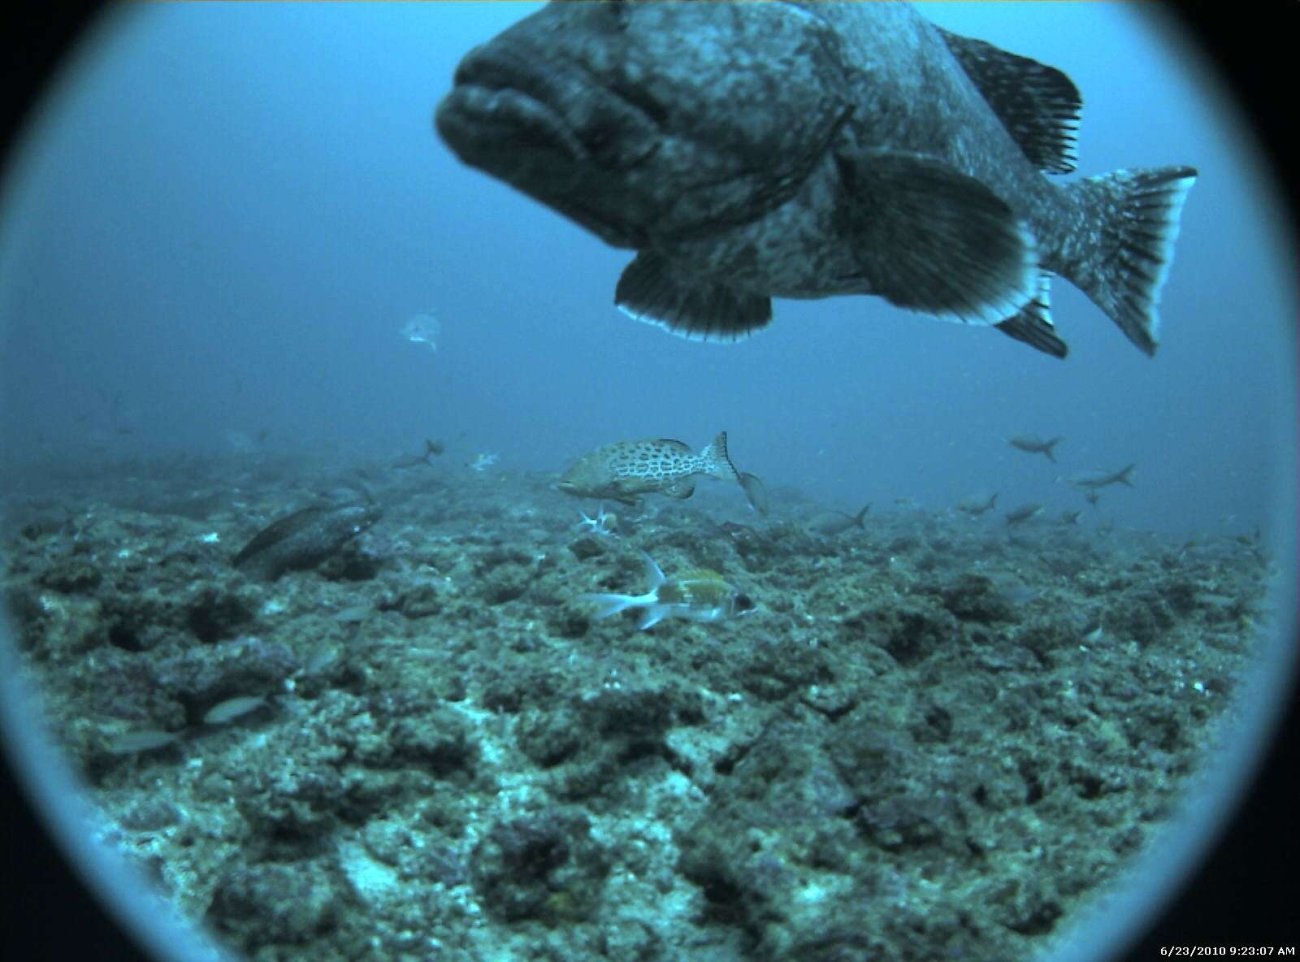 Marbled grouper (Dermatolepis inermis) in foreground; scamp grouper (Mycteroperca phenax) in center distance; and assemblage of otherfish